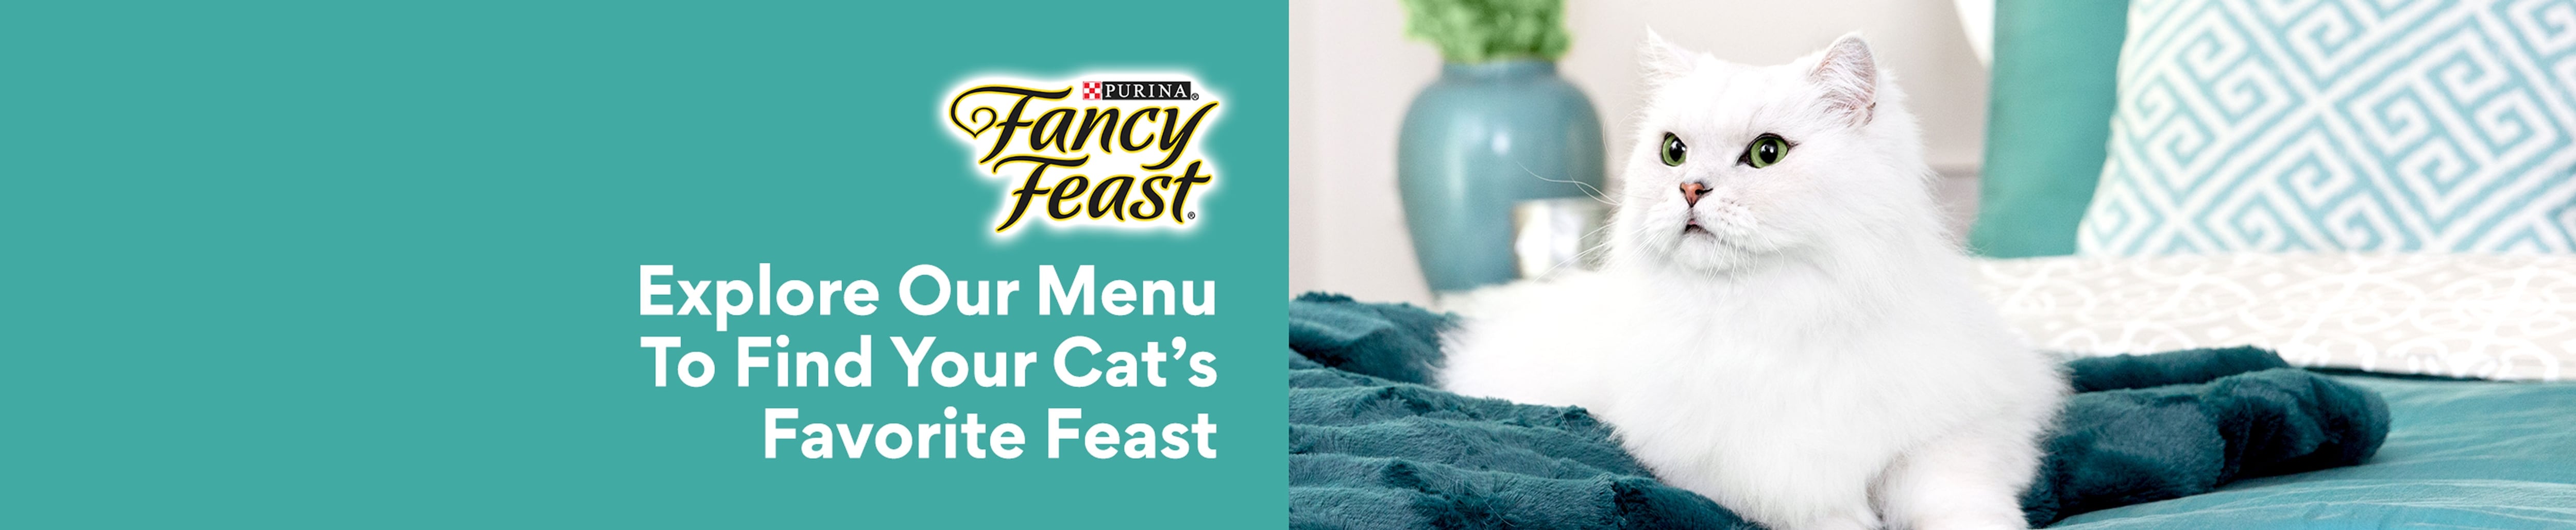 Purina Fancy Feast Explore our menu to find your cat's favorite feast